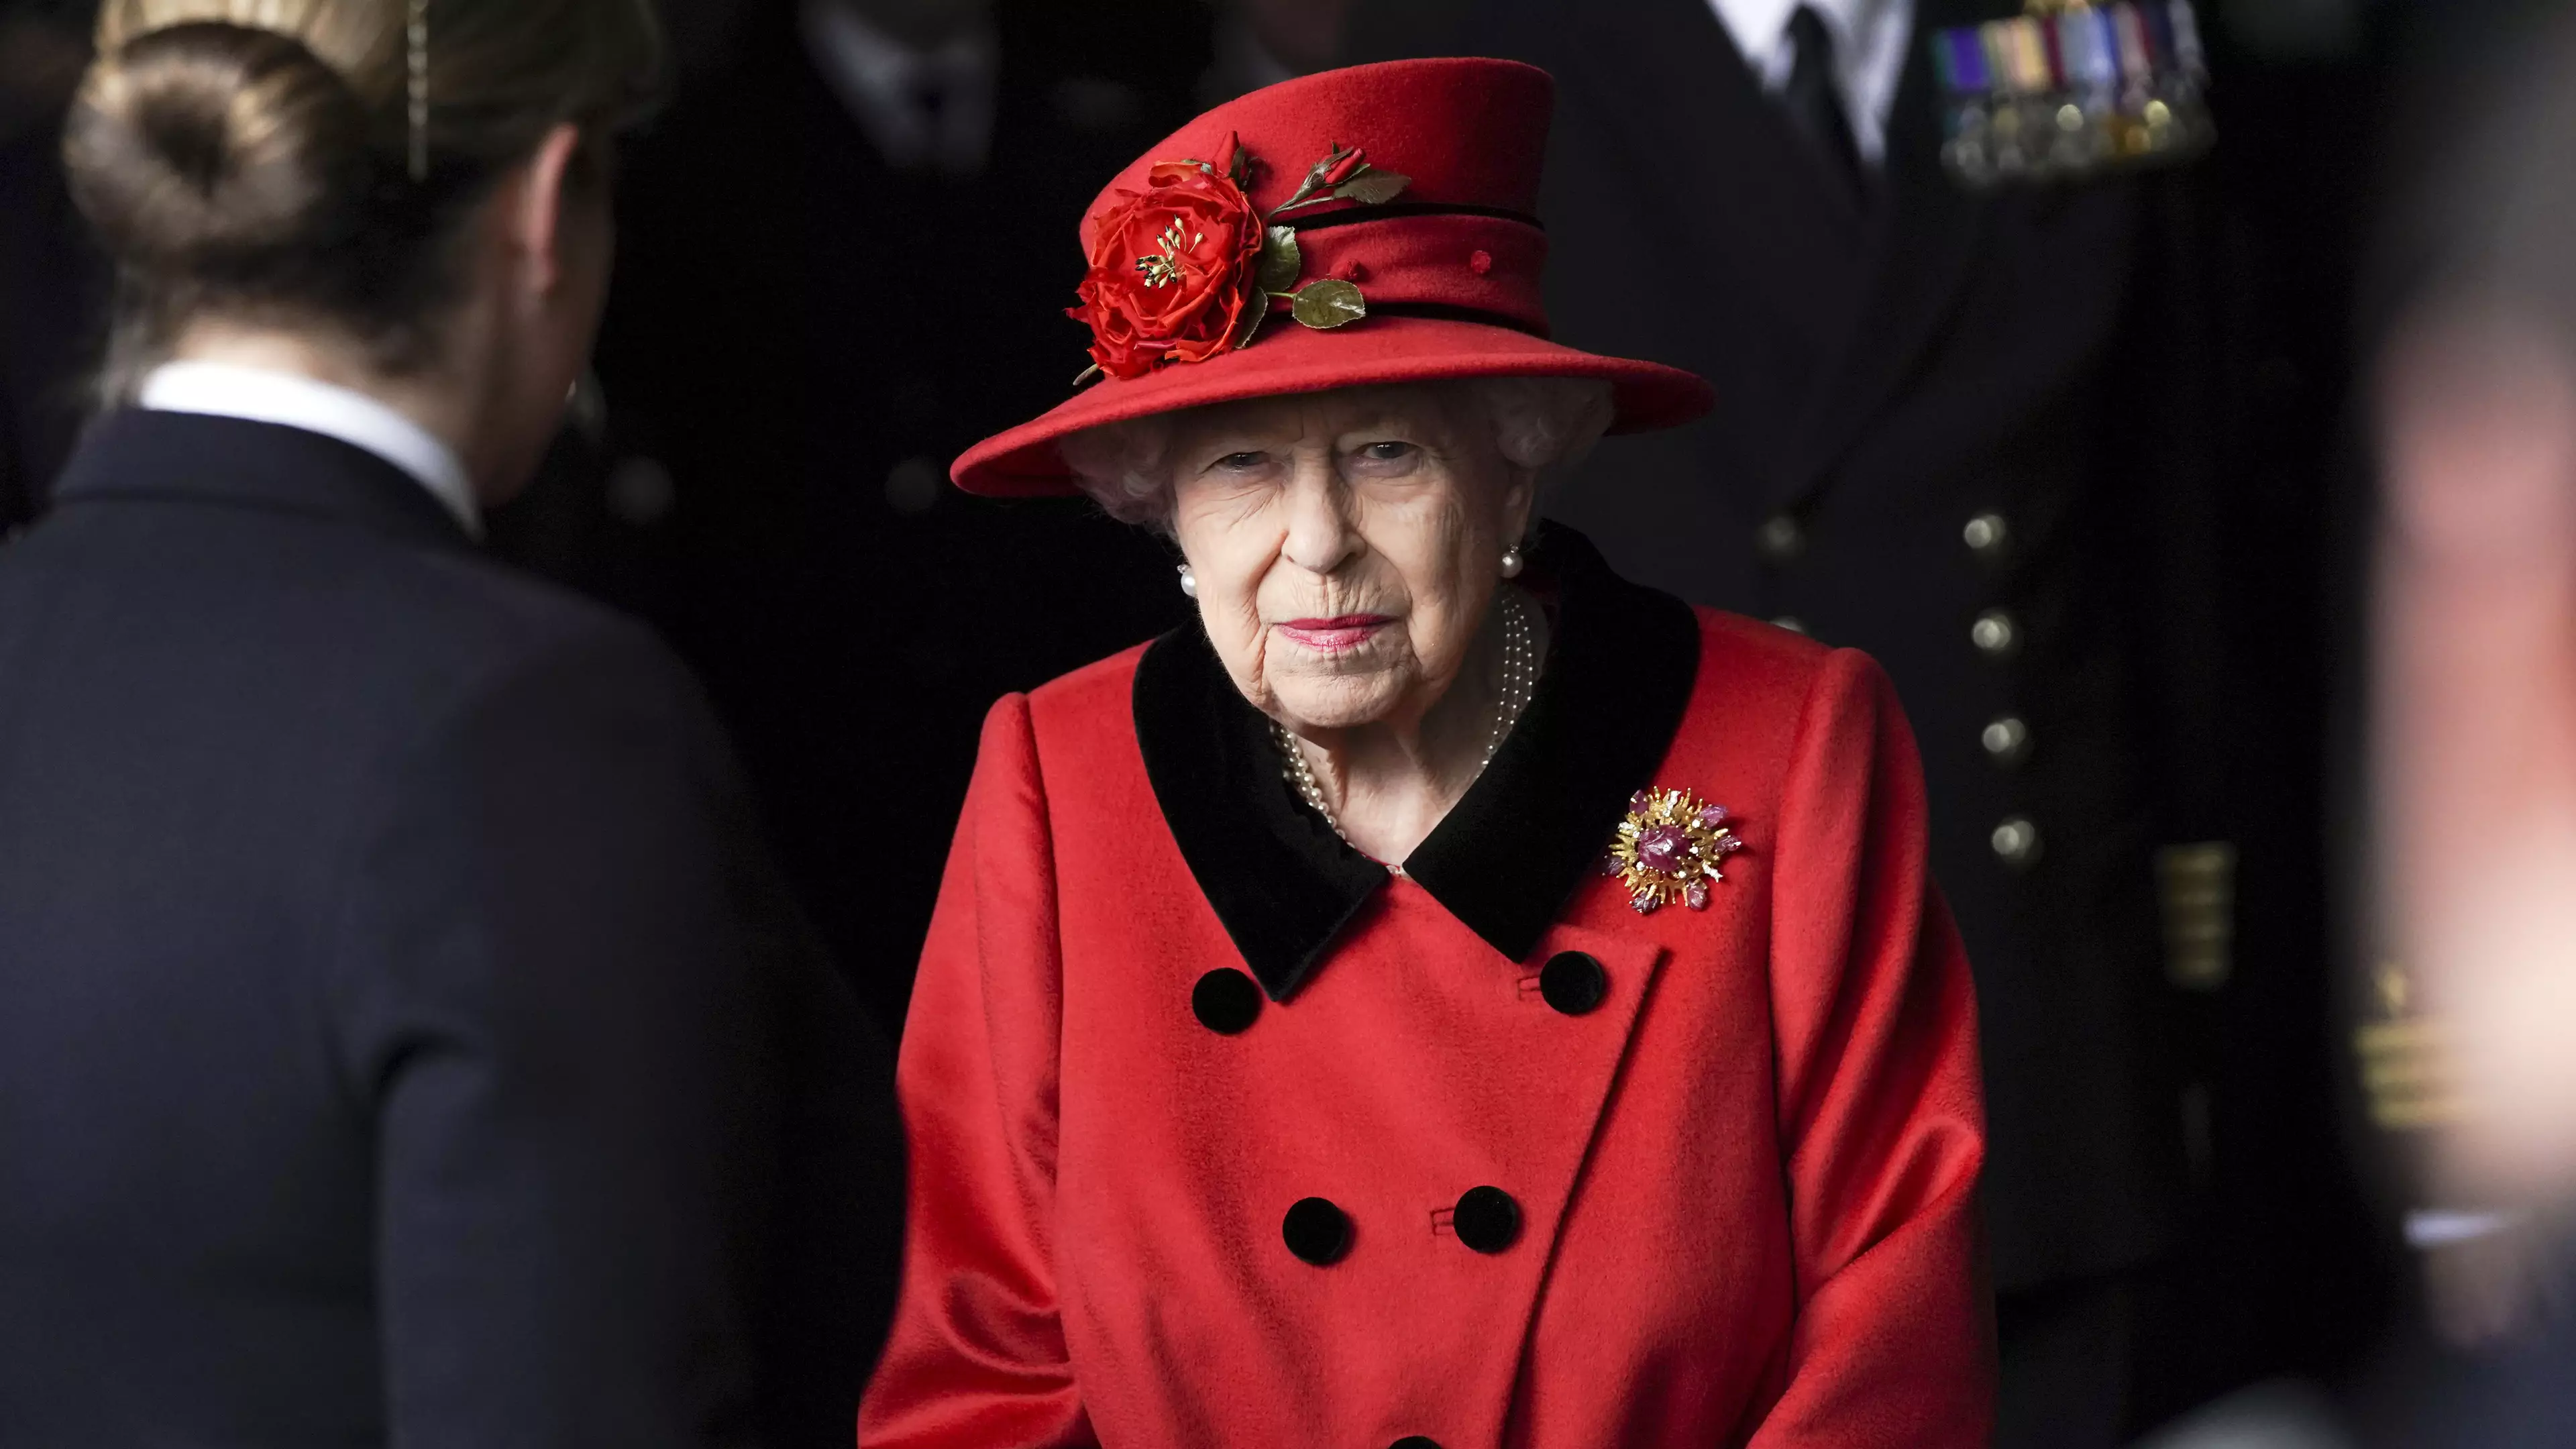 The Queen's Secret Signals She Uses To Communicate With Staff